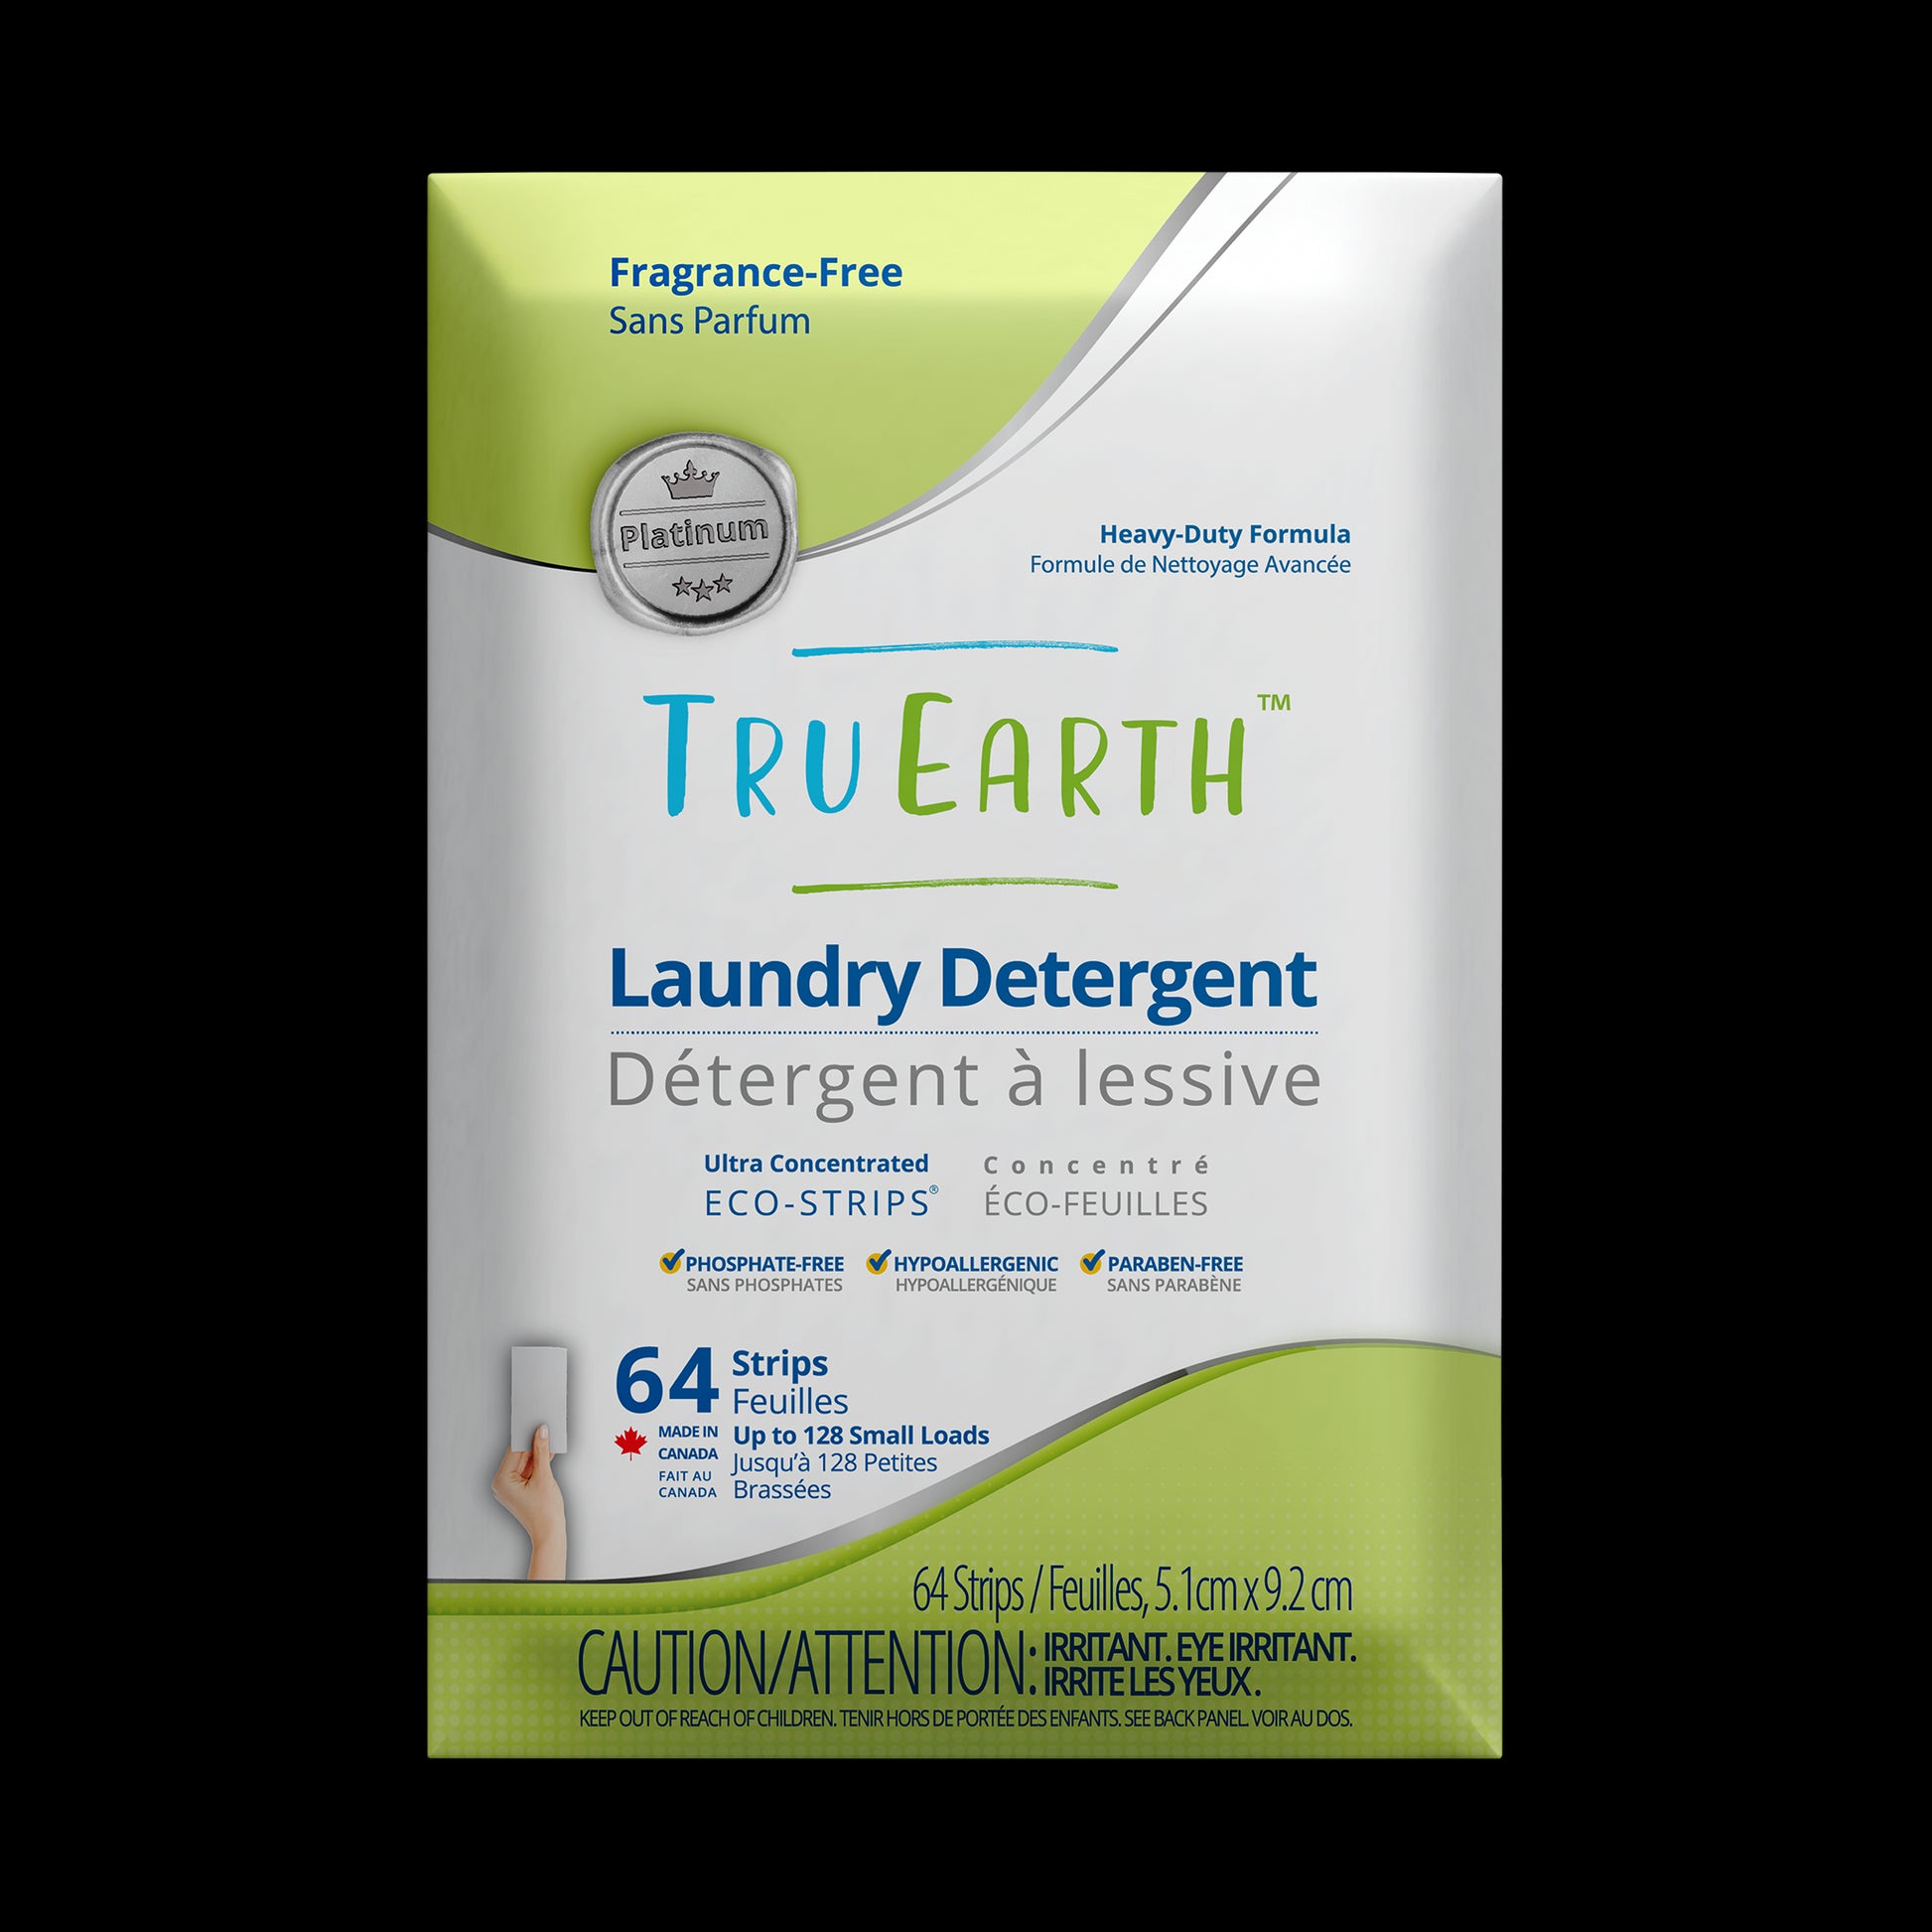 TruEarth Platinum Laundry Detergent Fragrance-Free Front of Package